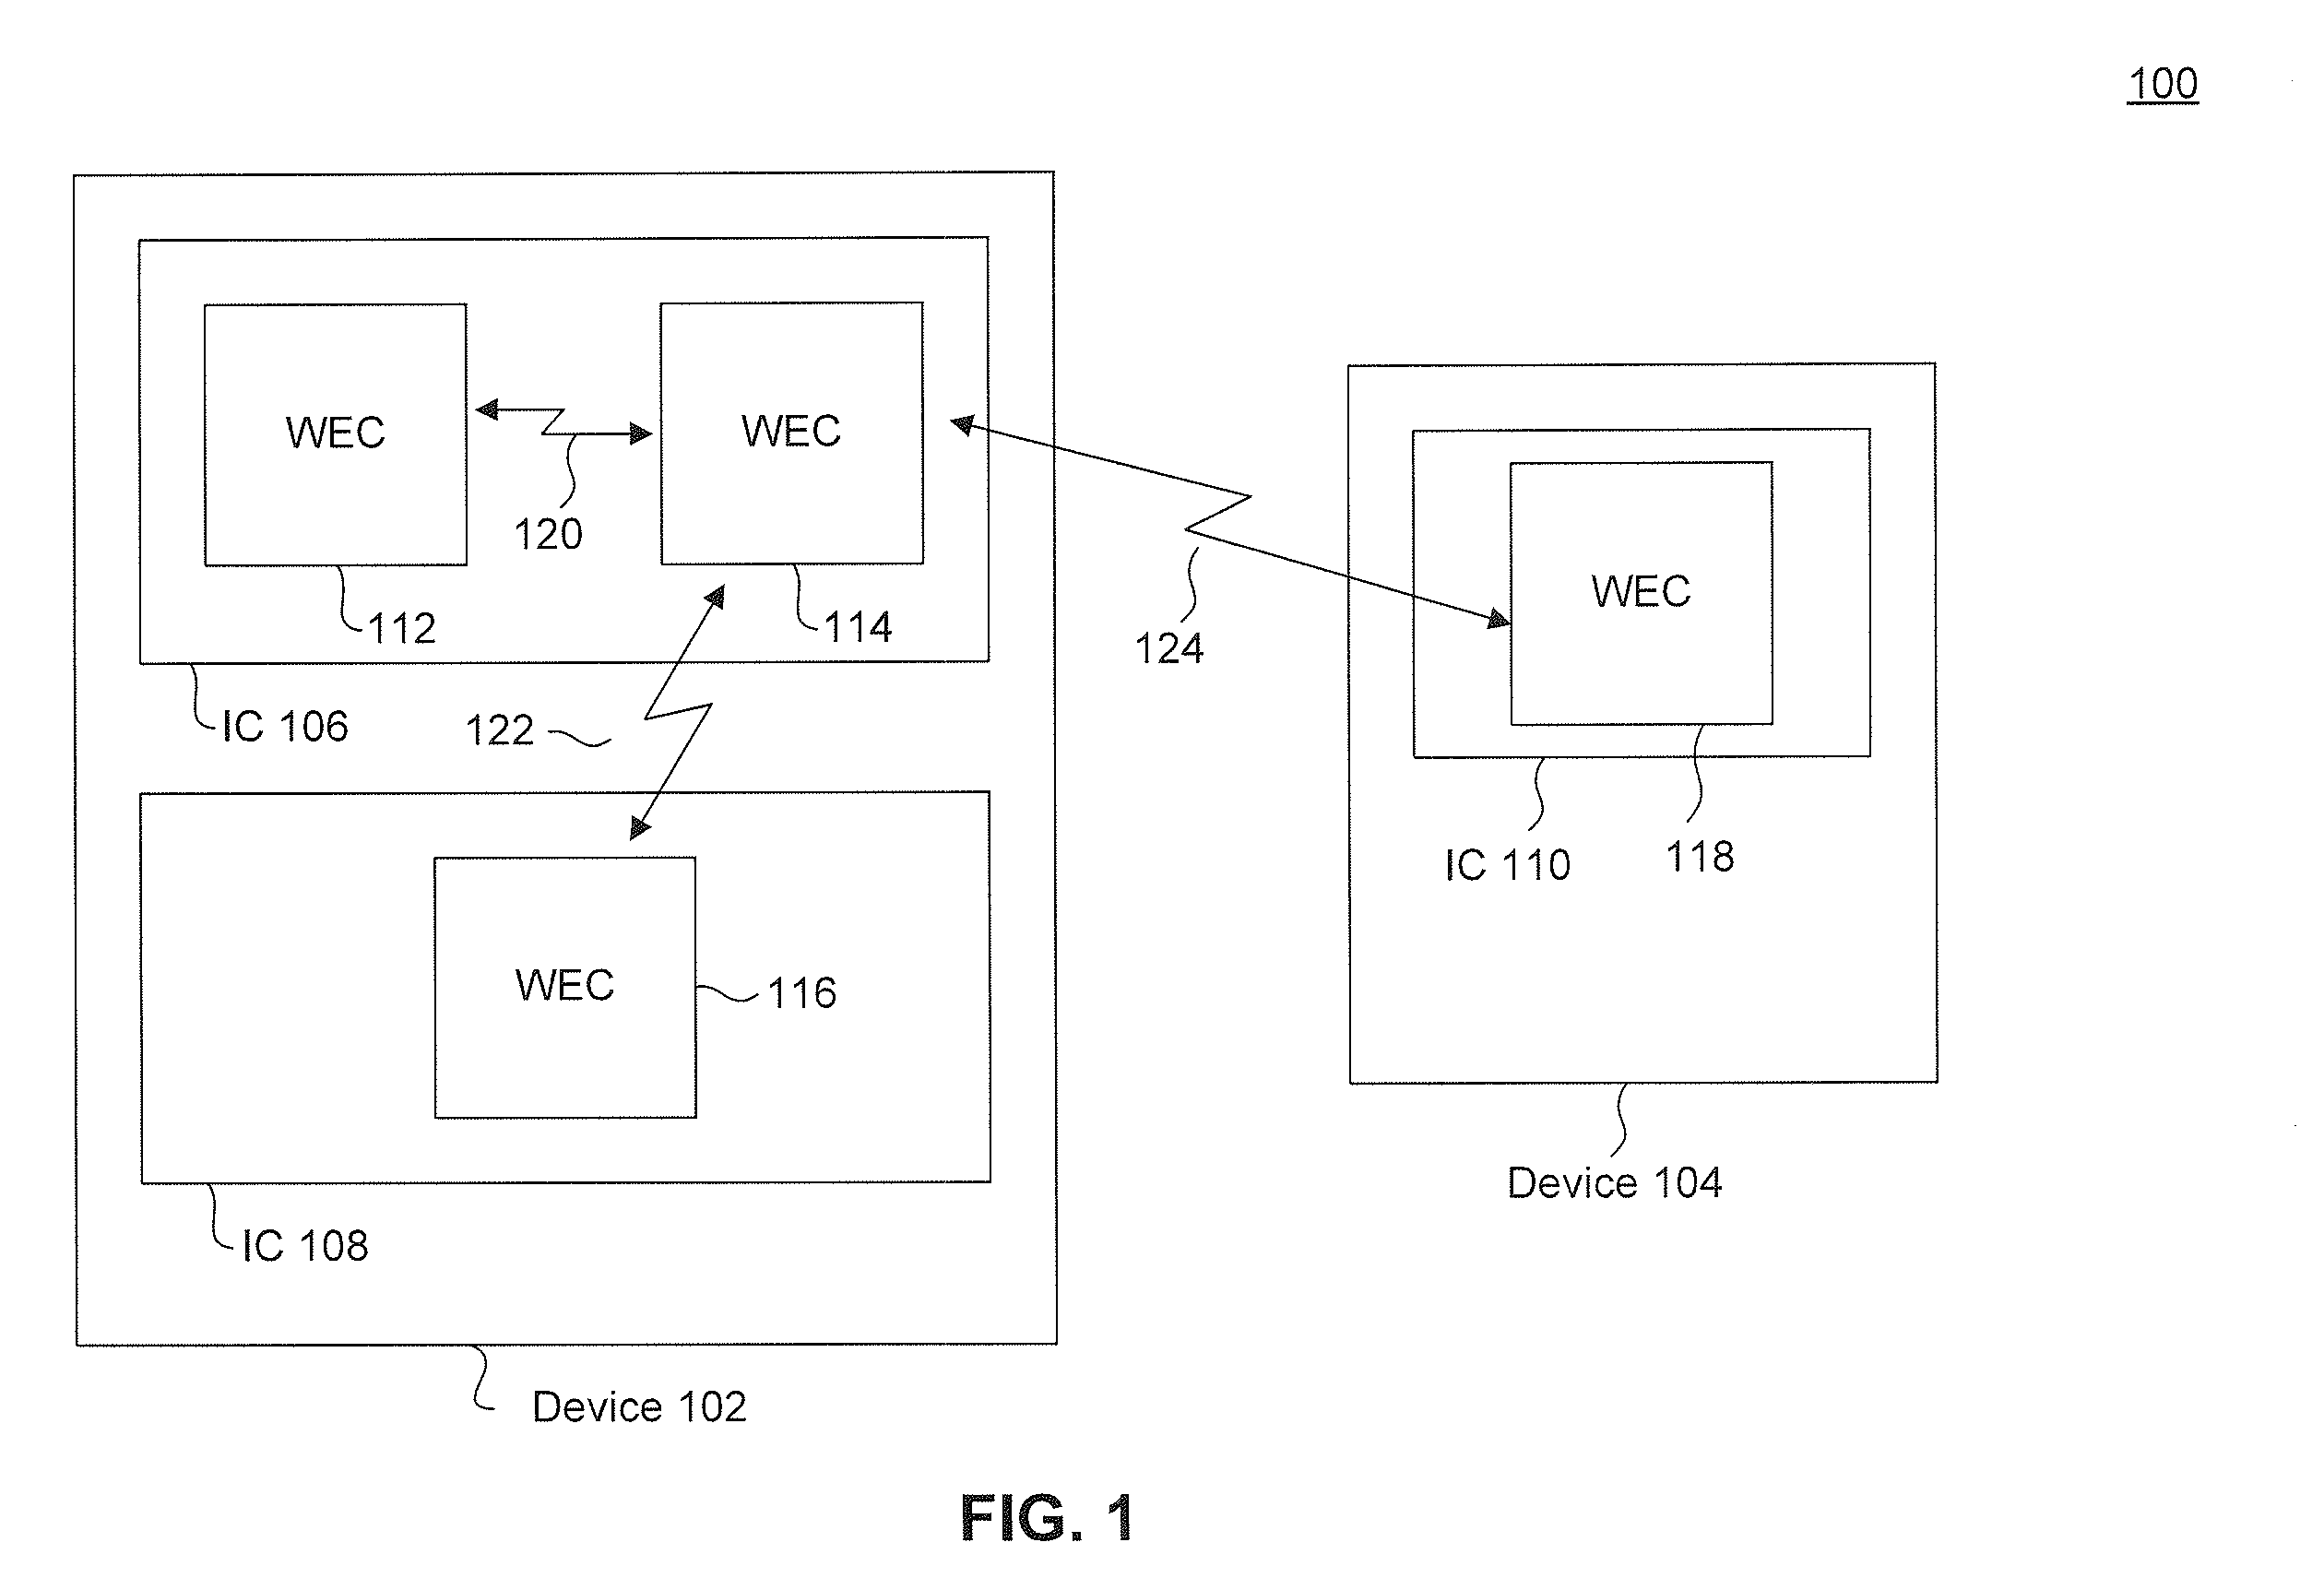 Establishing A Wireless Communications Bus And Applications Thereof